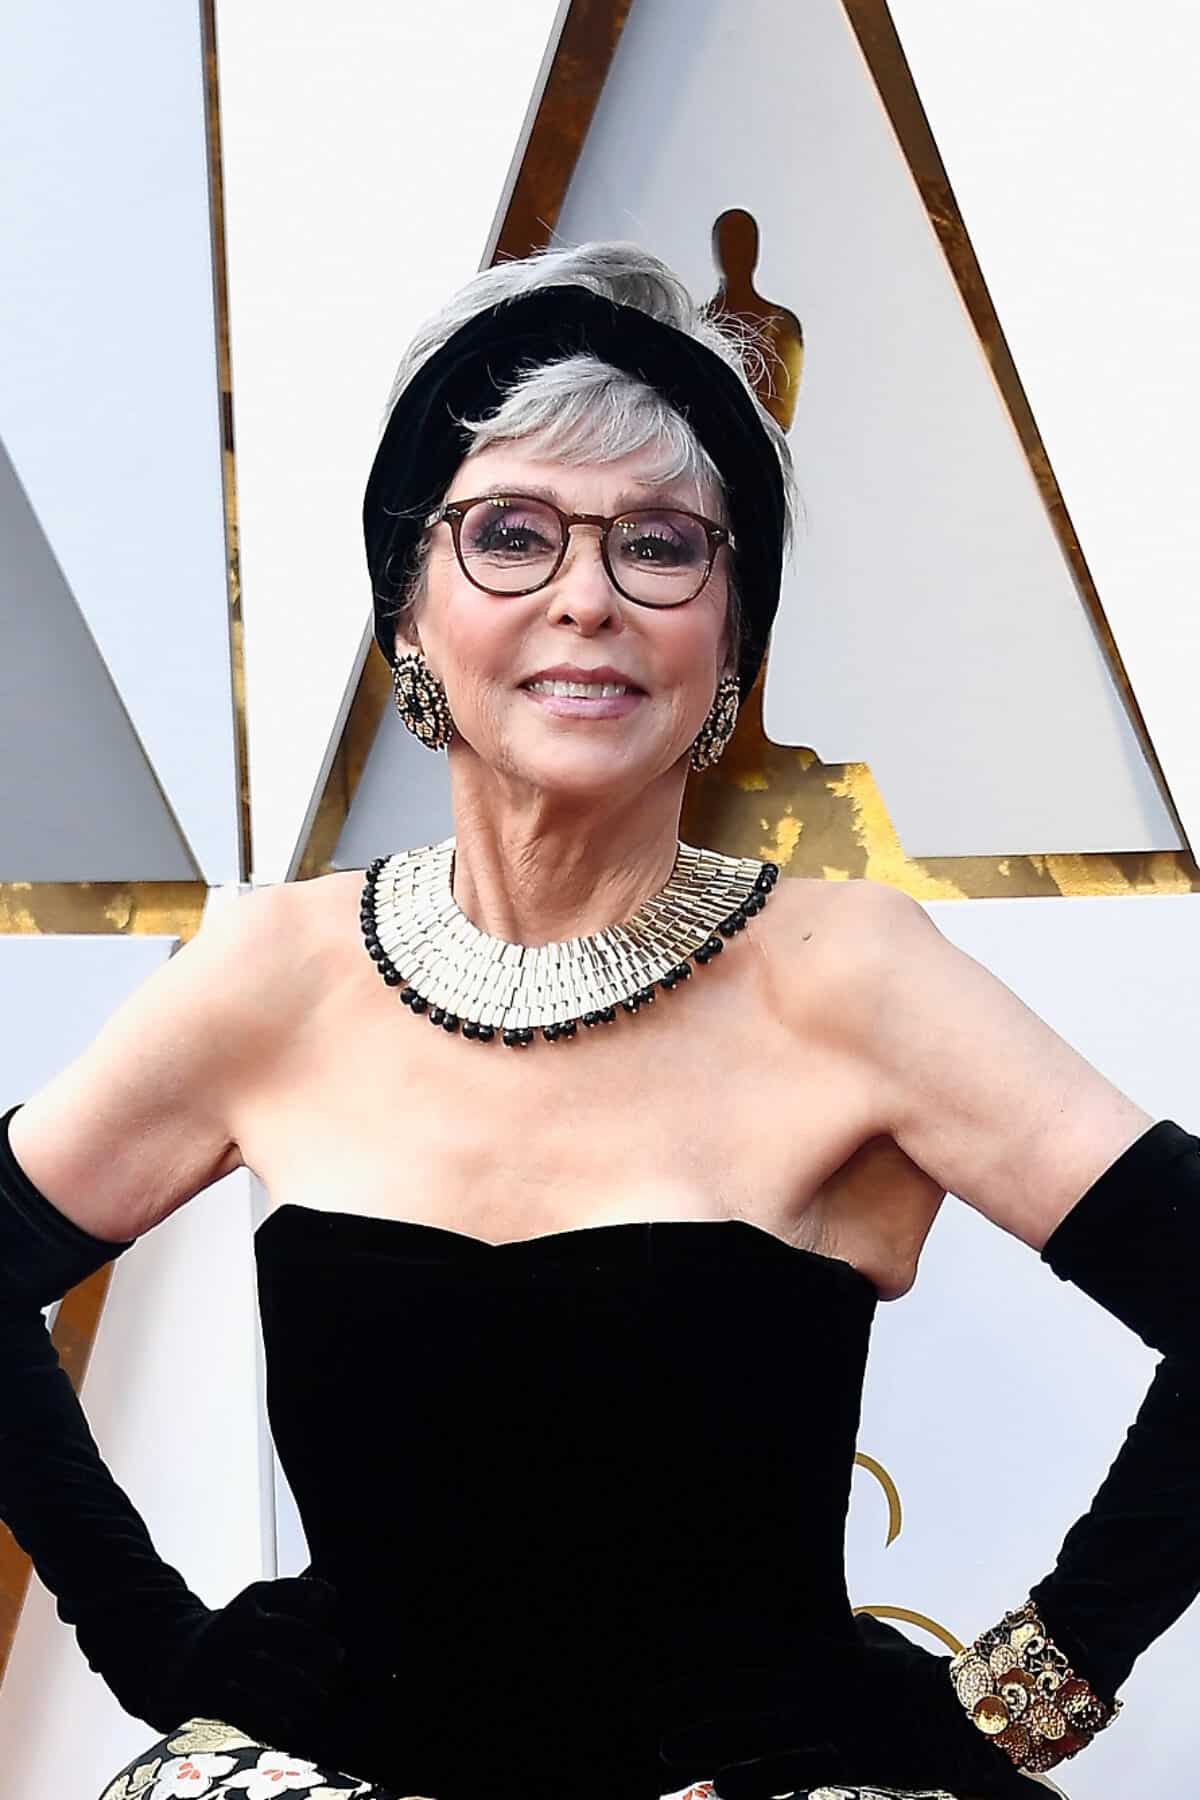 HOLLYWOOD, CA - MARCH 04: Rita Moreno attends the 90th Annual Academy Awards at Hollywood & Highland Center on March 4, 2018 in Hollywood, California. (Photo by Frazer Harrison/Getty Images)